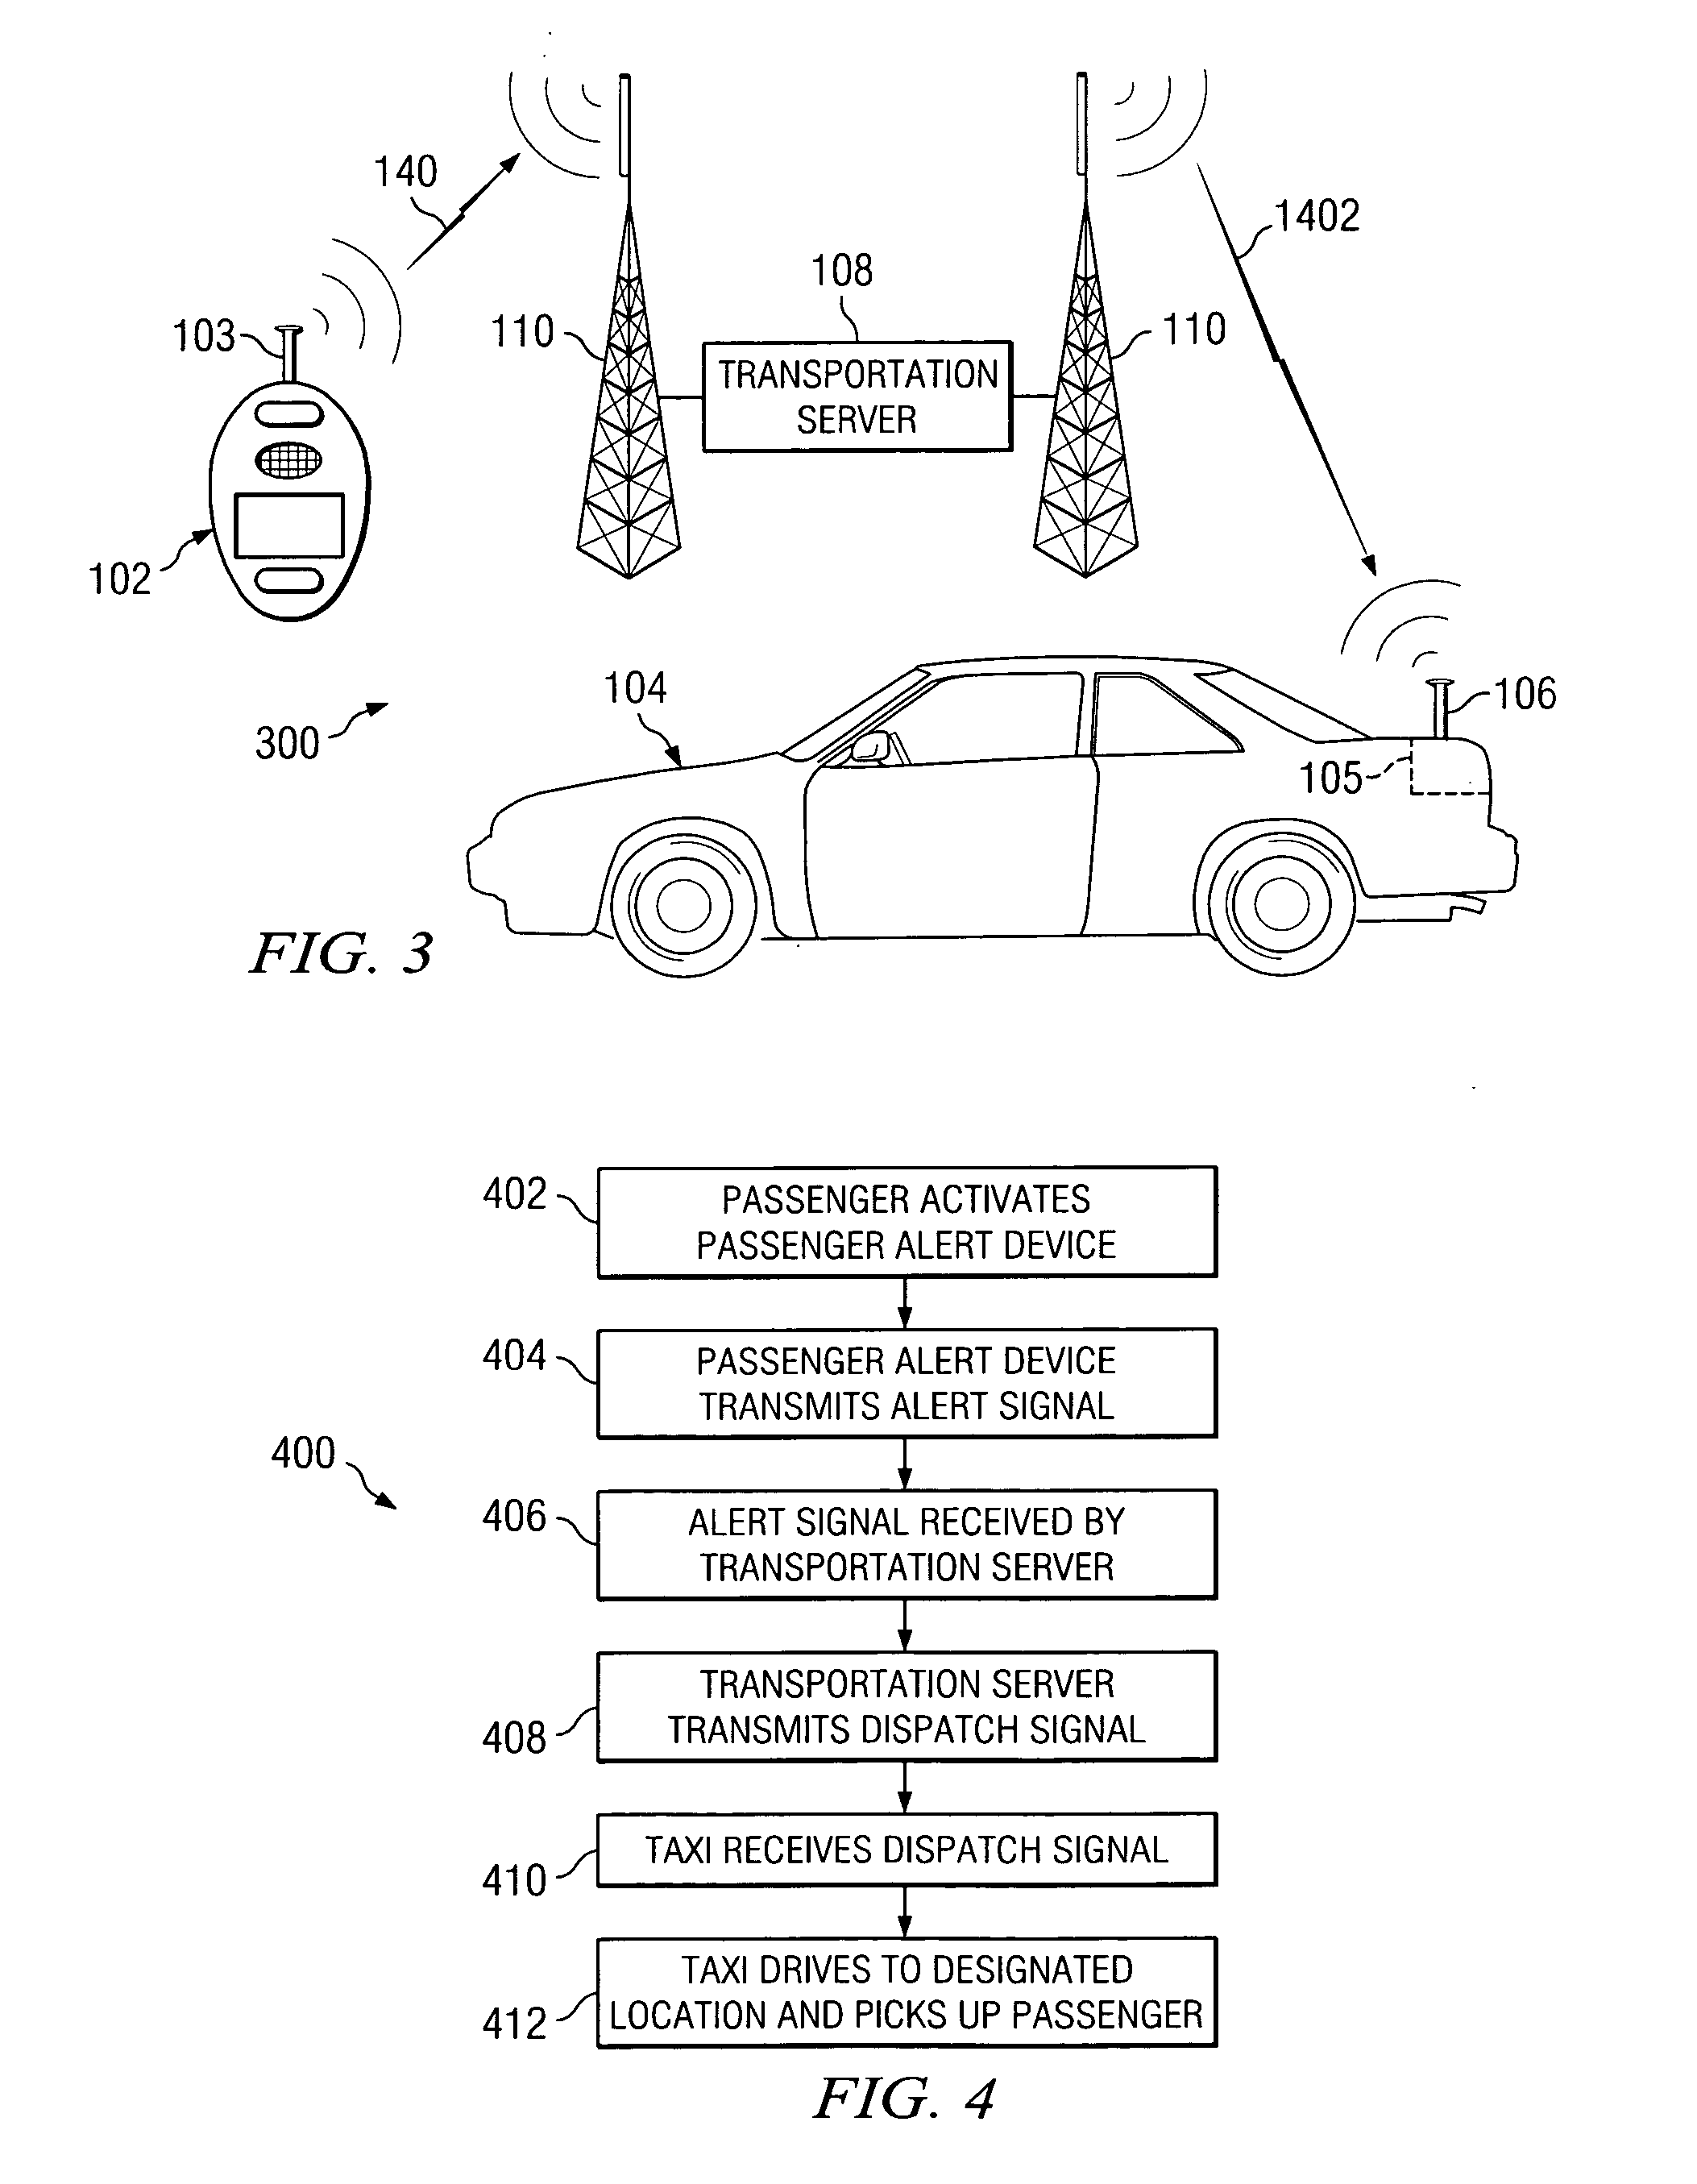 Portable service identification, notification and location device and method